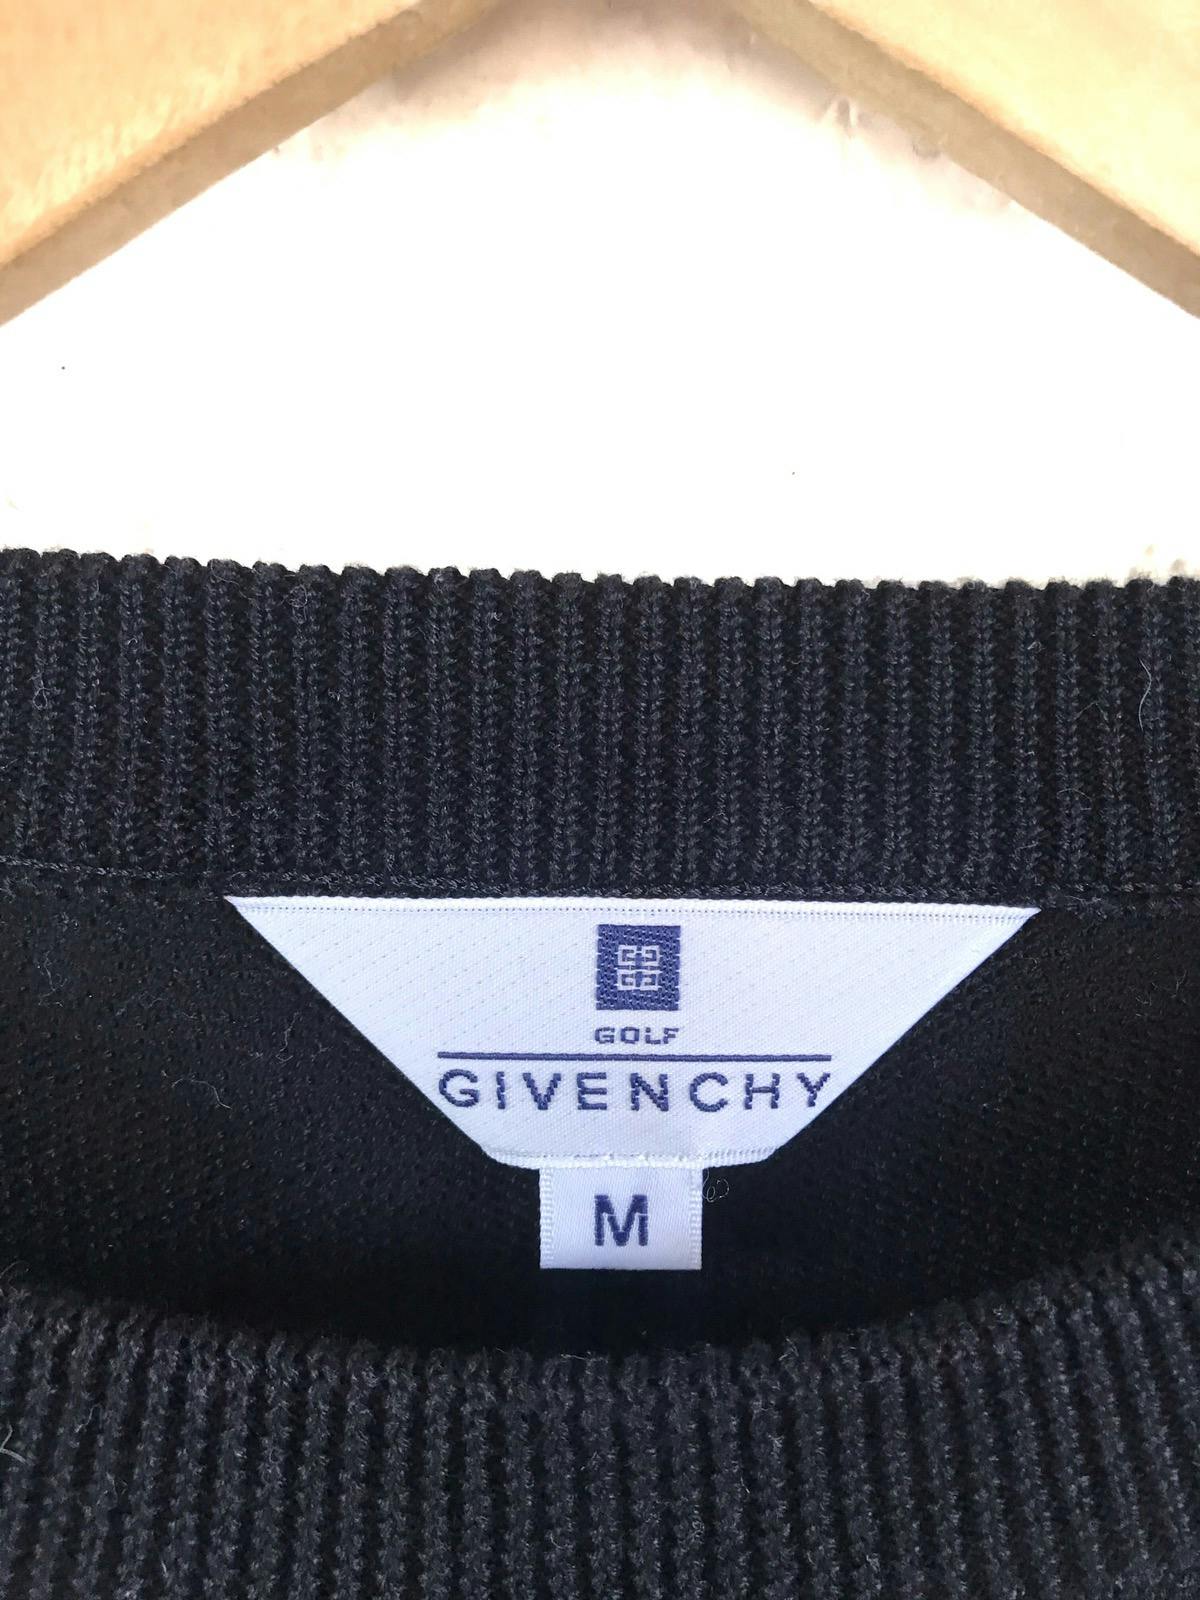 Givenchy Golf Small Logo Knit Sweater - 3